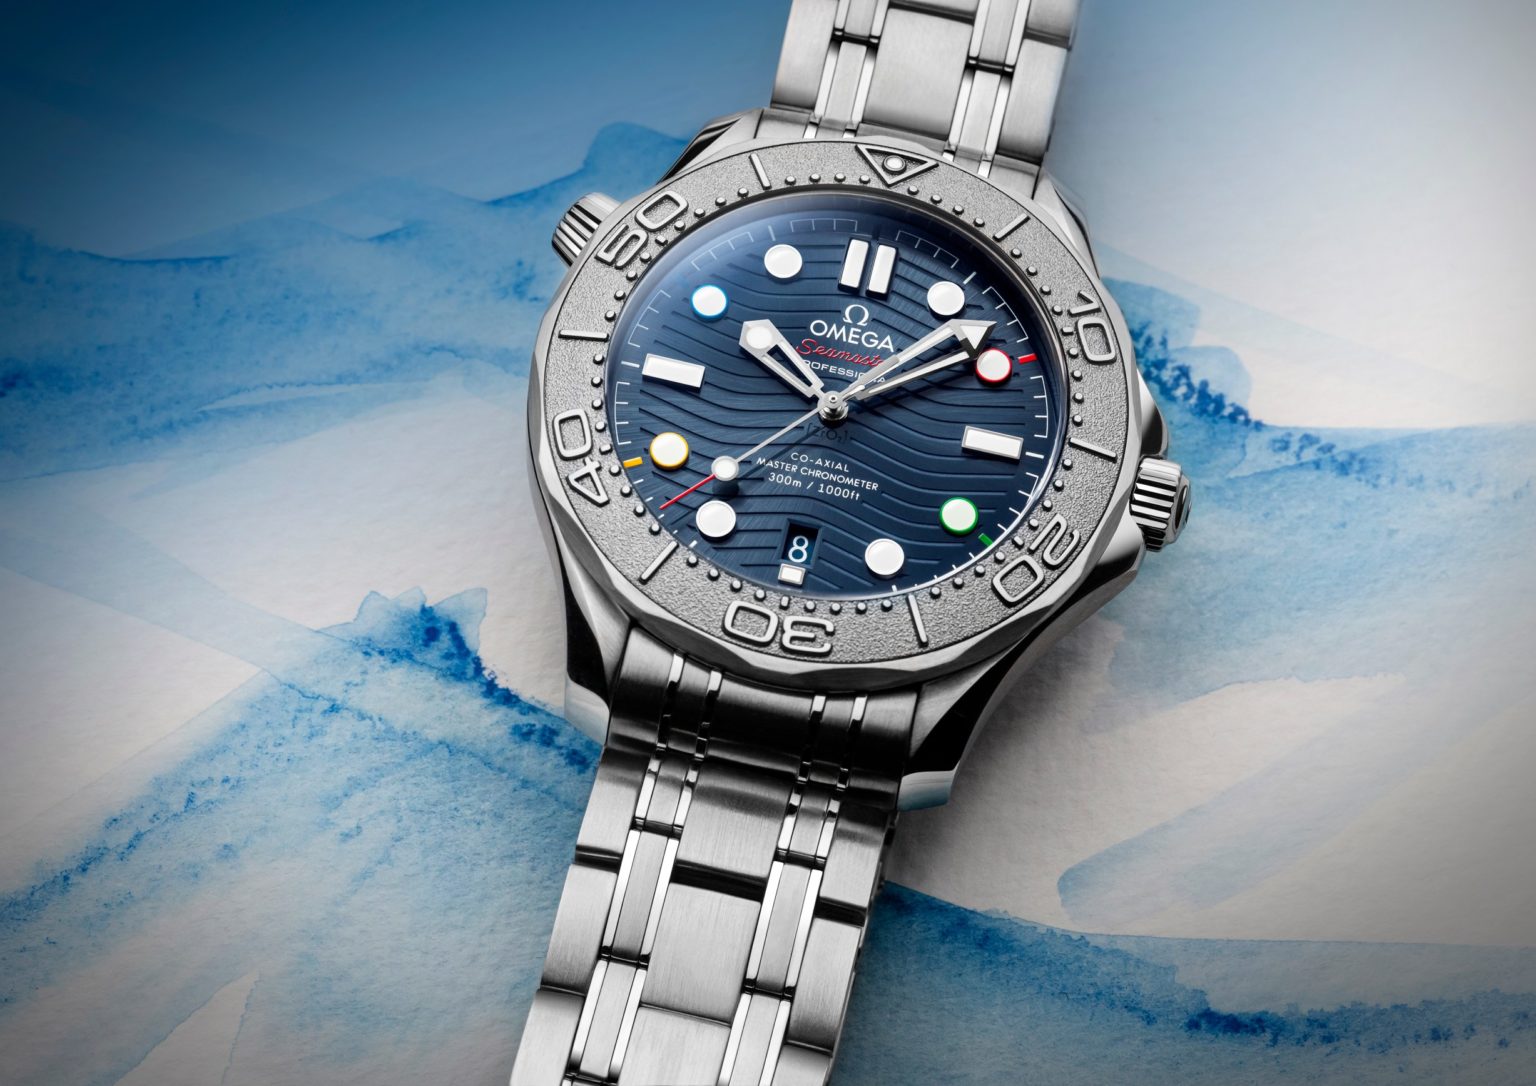 Omega Unveils Special Edition Watch for Beijing 2022 Olympic Winter